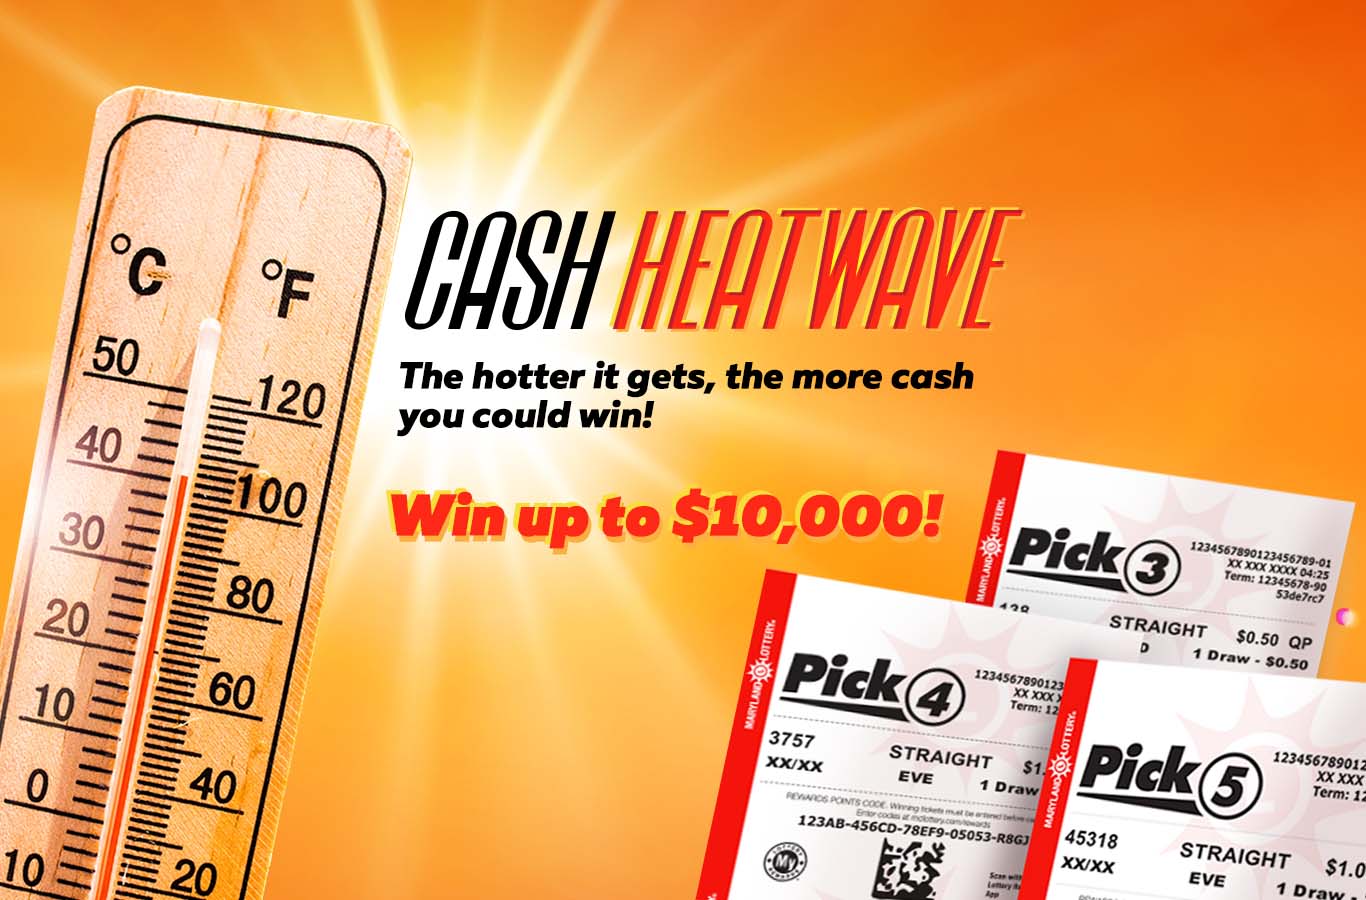 The hotter it gets, the more cash you could win!